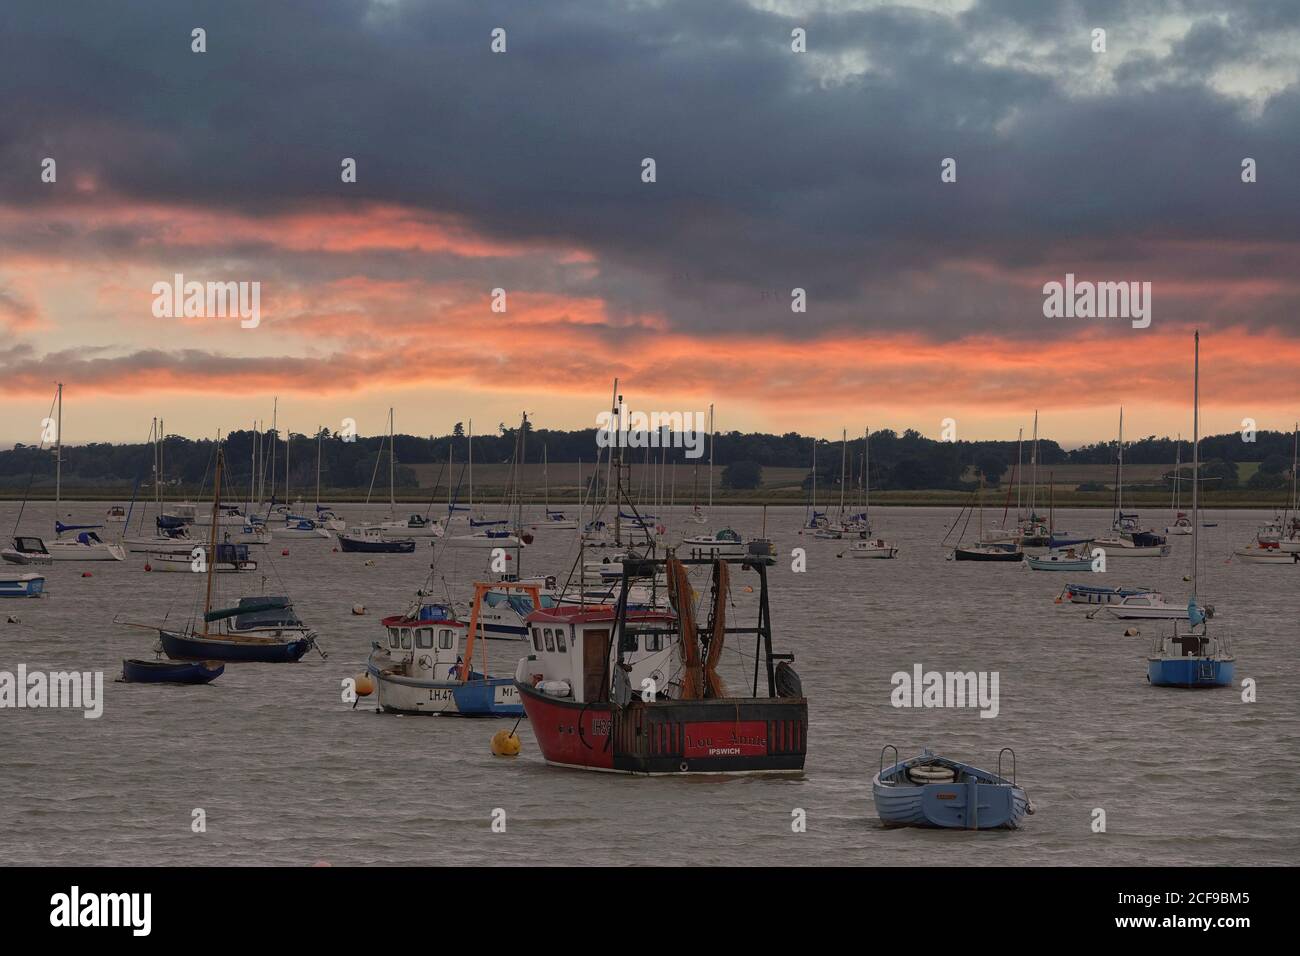 Felixstowe Ferry Suffolk's quirky 'olde World' fishing village viewed as the sun rises Stock Photo